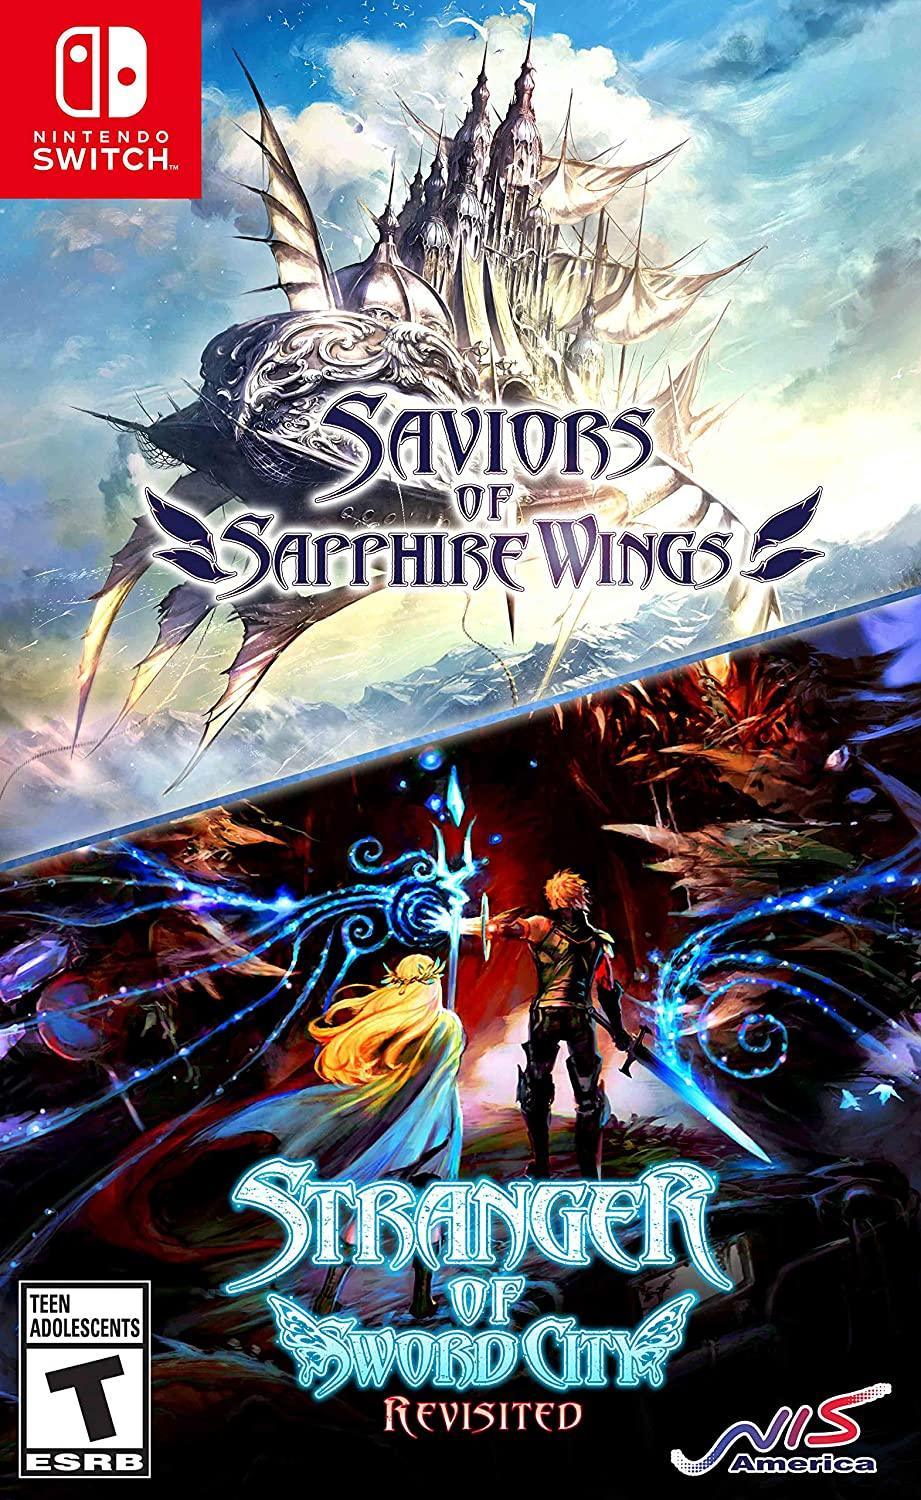 Saviors of Sapphire Wings / Stranger of Sword City Revisited - Nintendo Switch - GD Games 